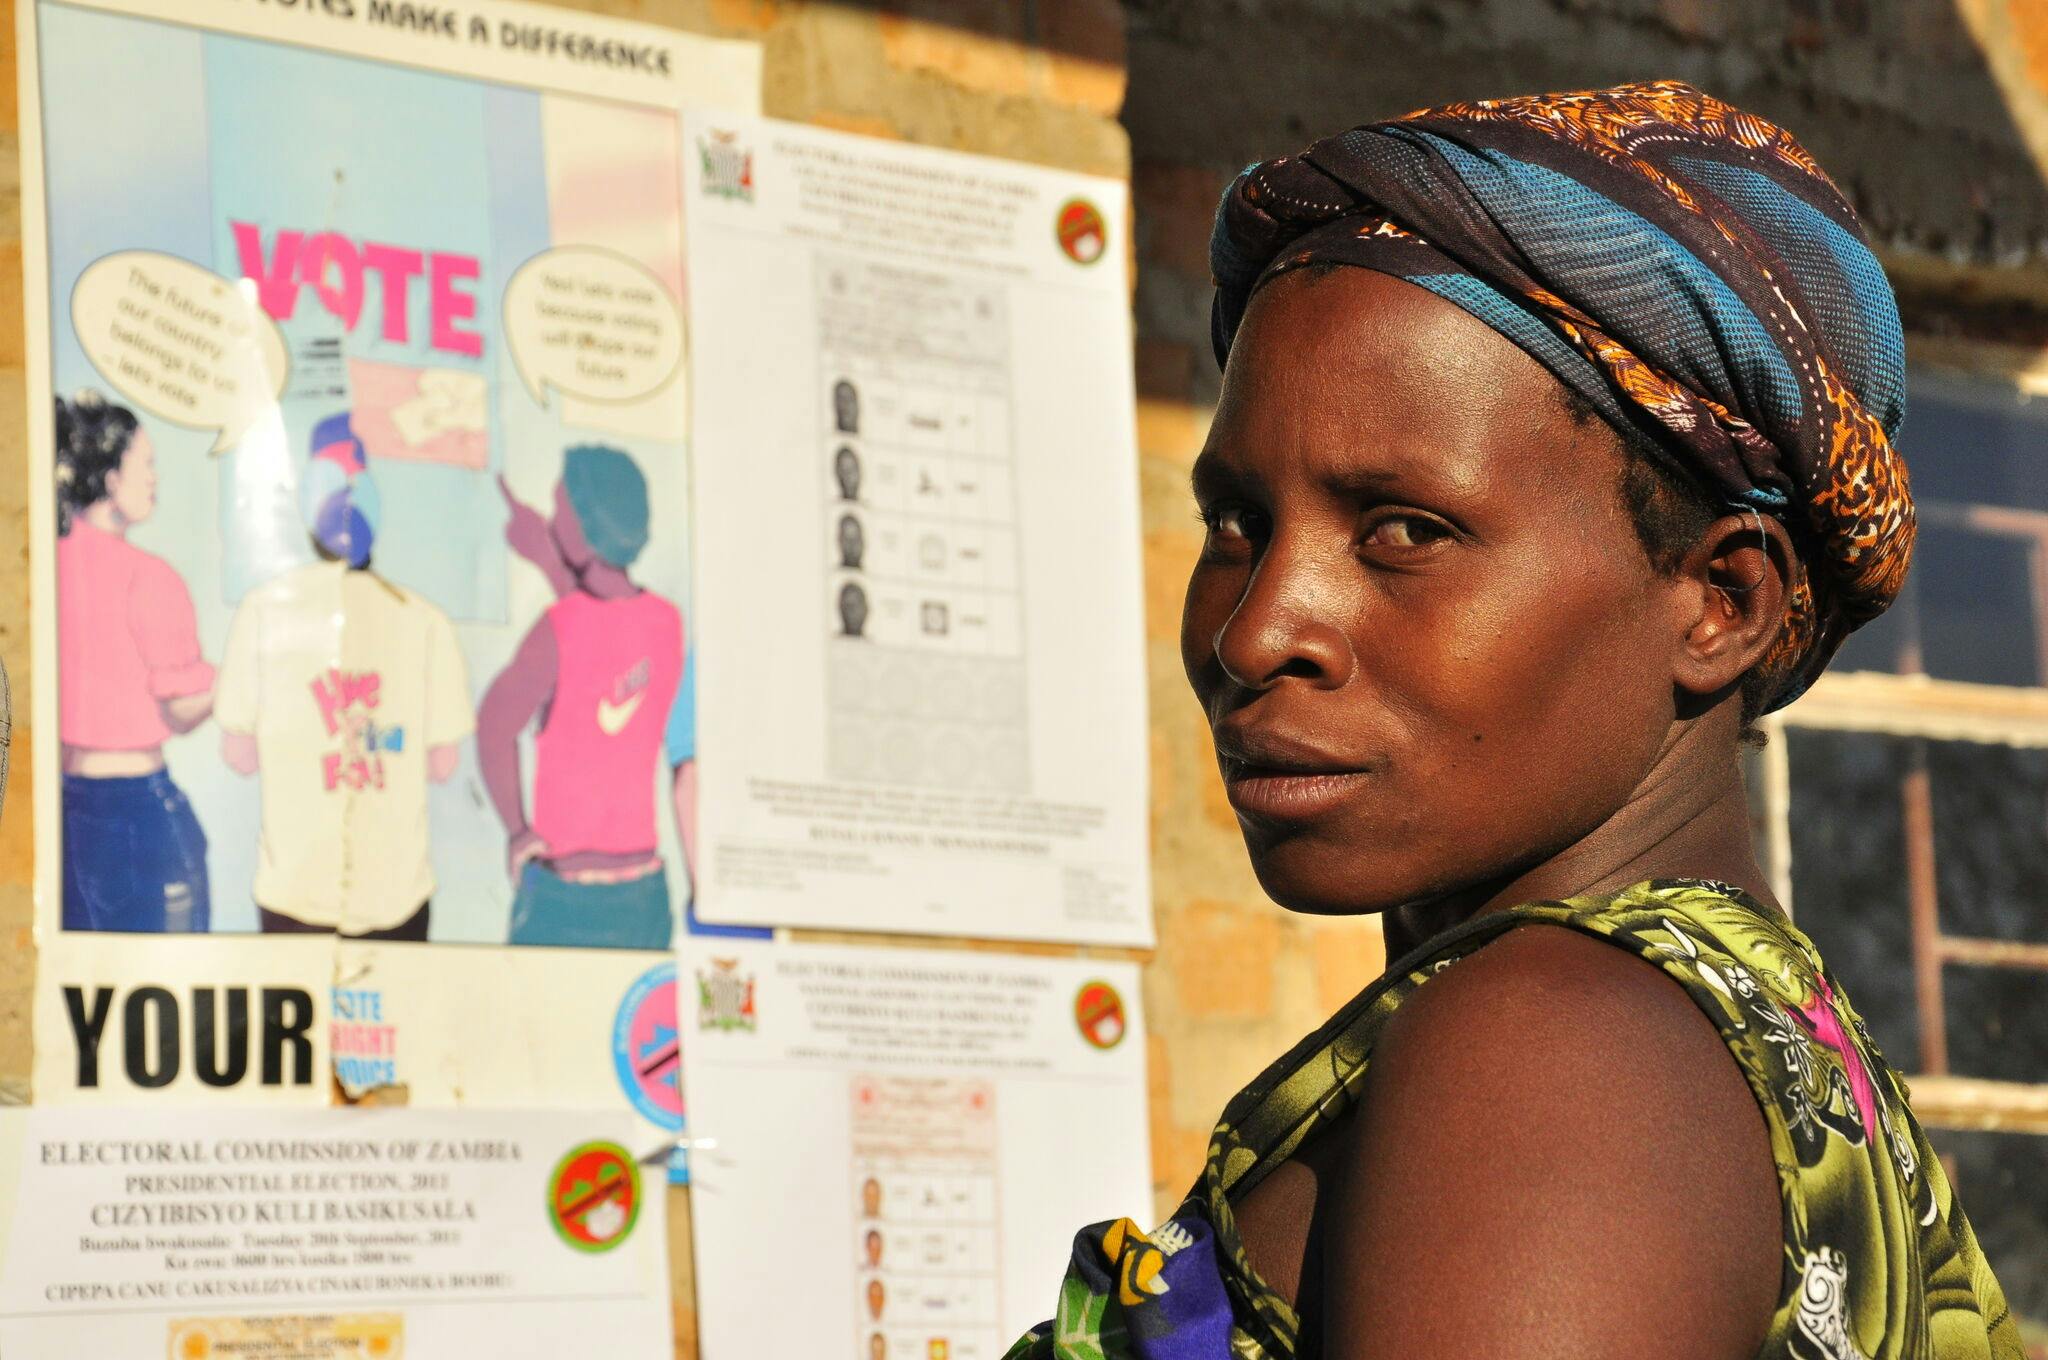 A woman in front of a voting poster